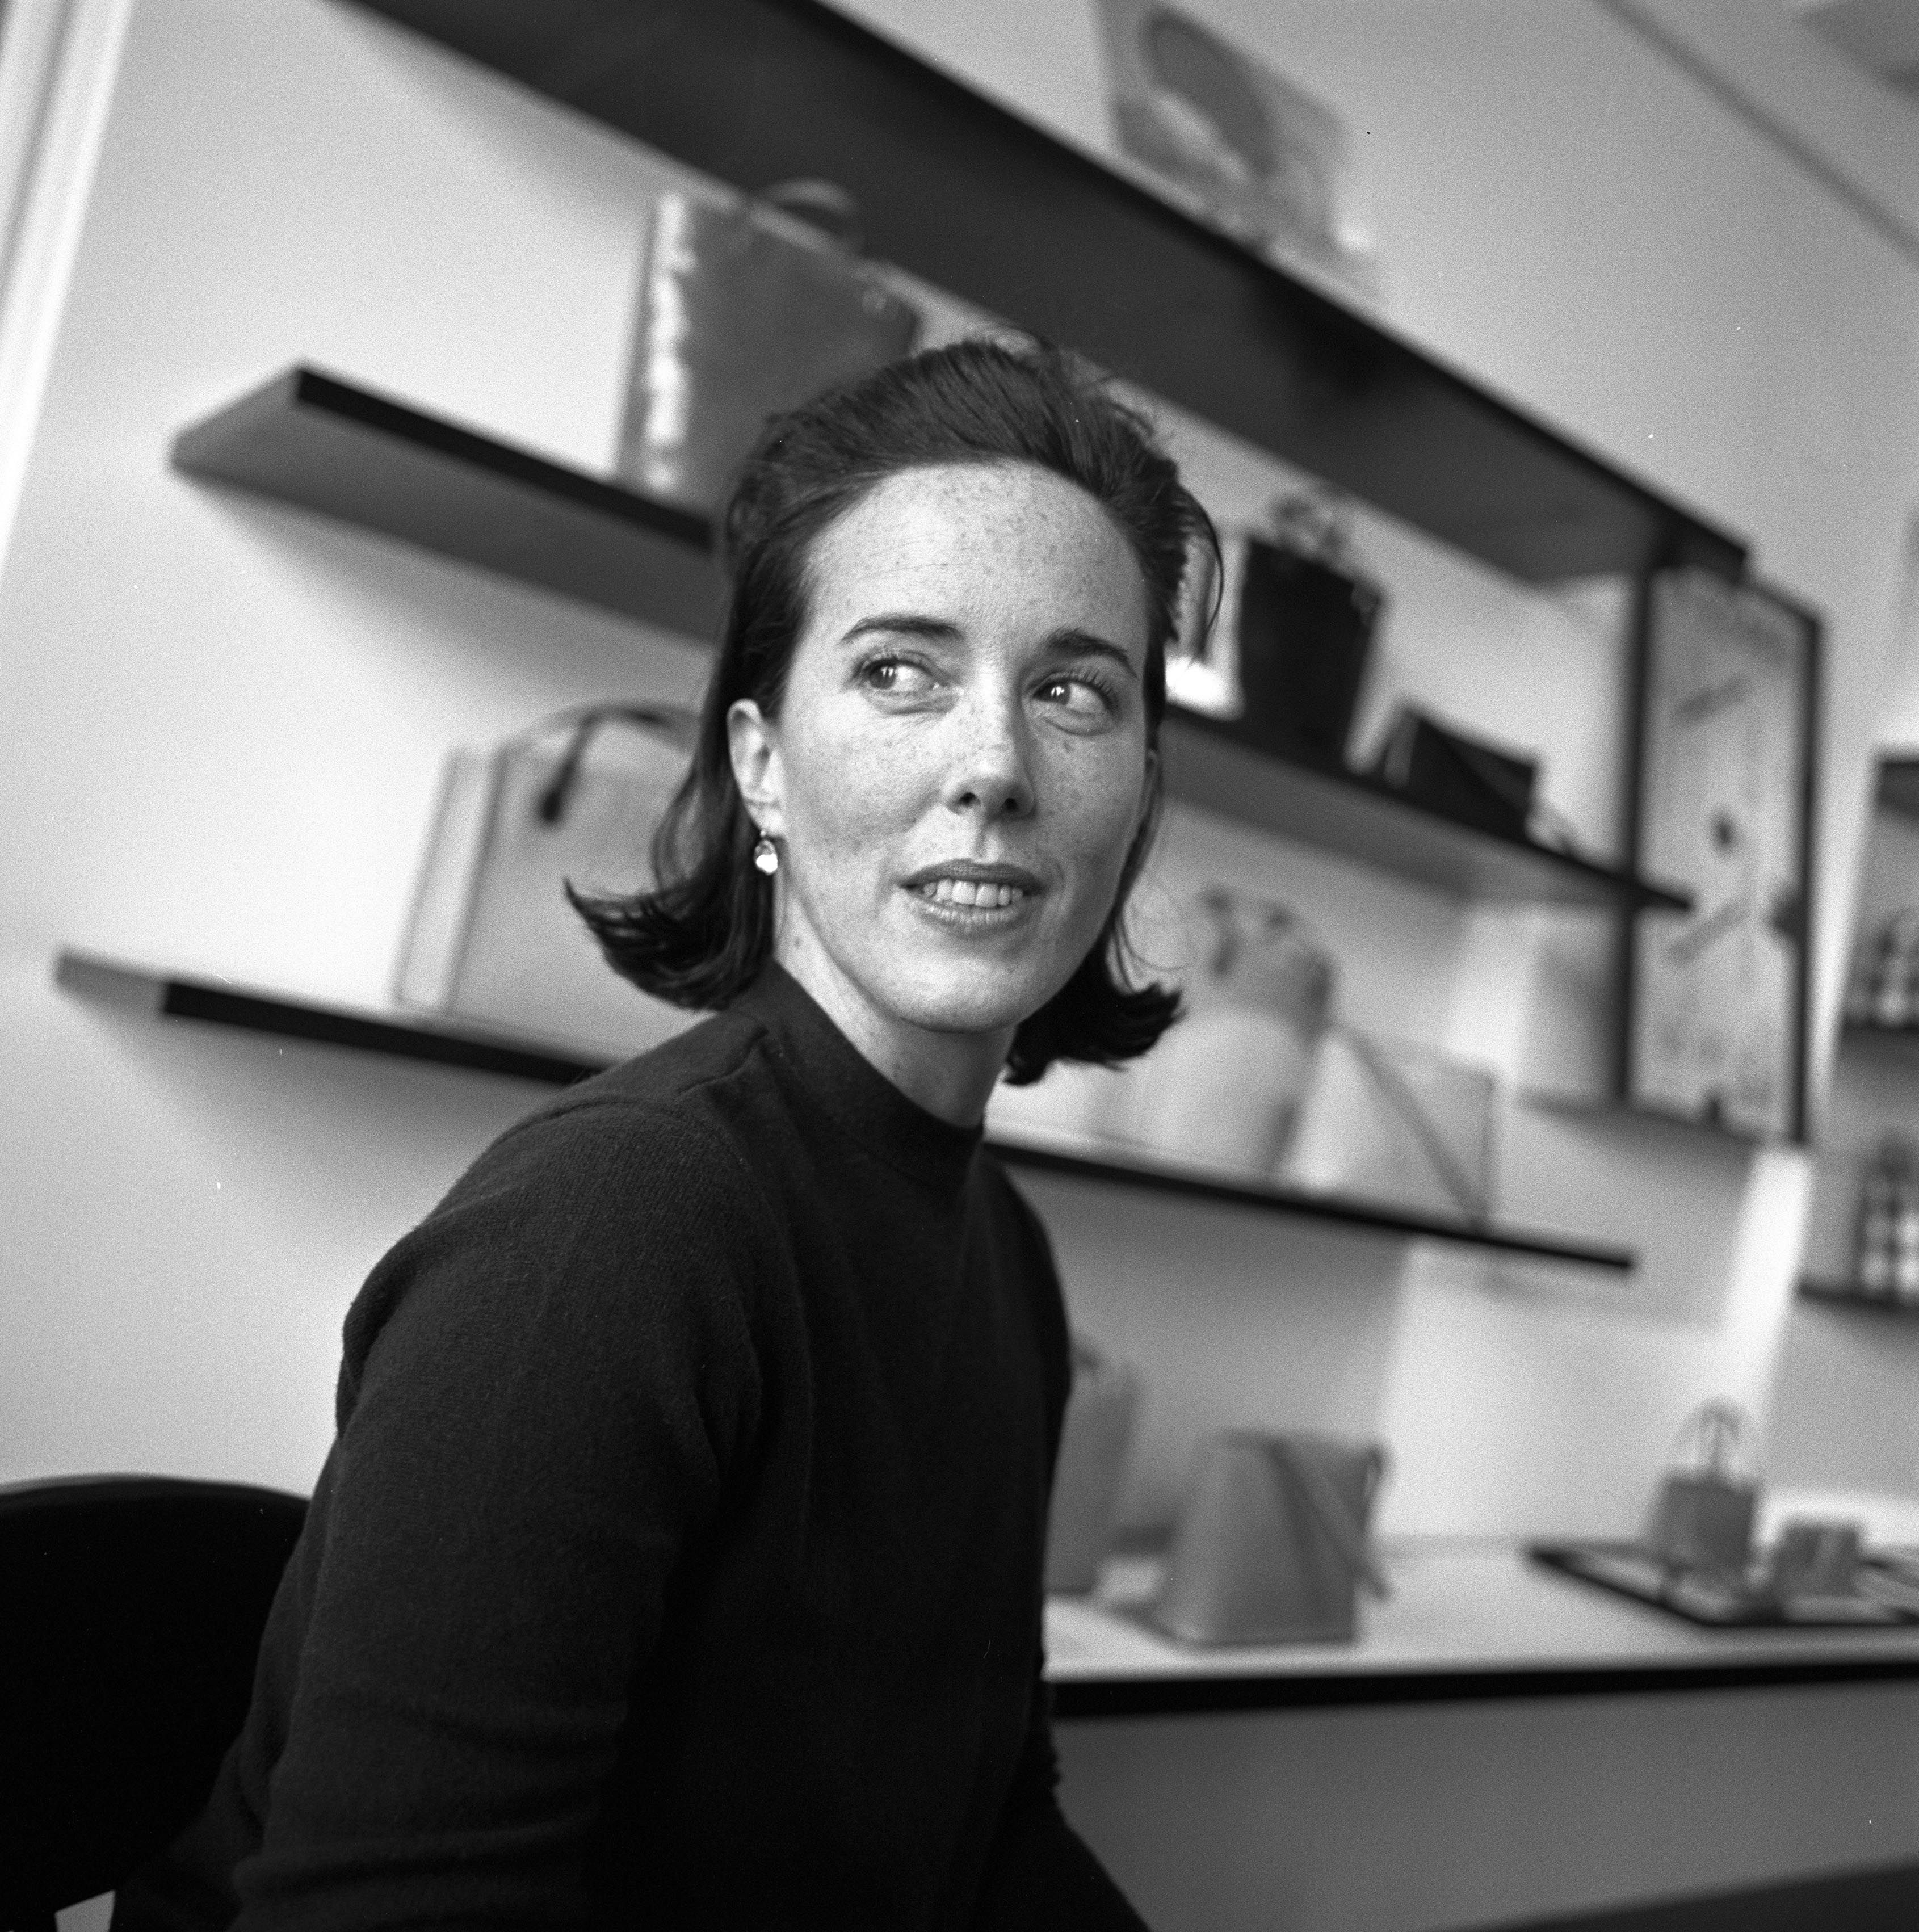 Who Is Kate Spade's New Creative Director? - Kate Spade Creative Director  Nicola Glass